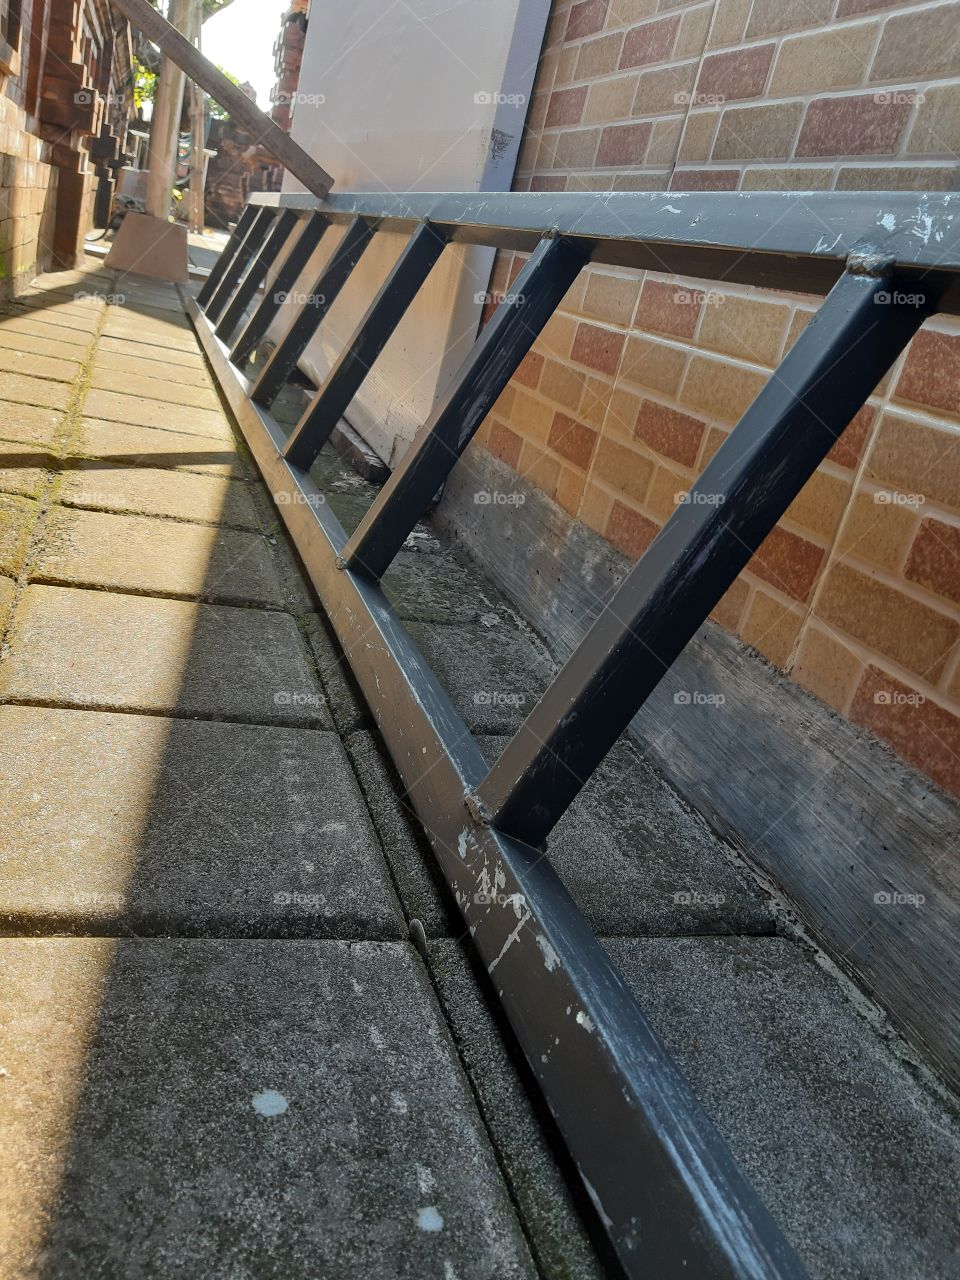 The steel ladder is lying horizontally on the wall